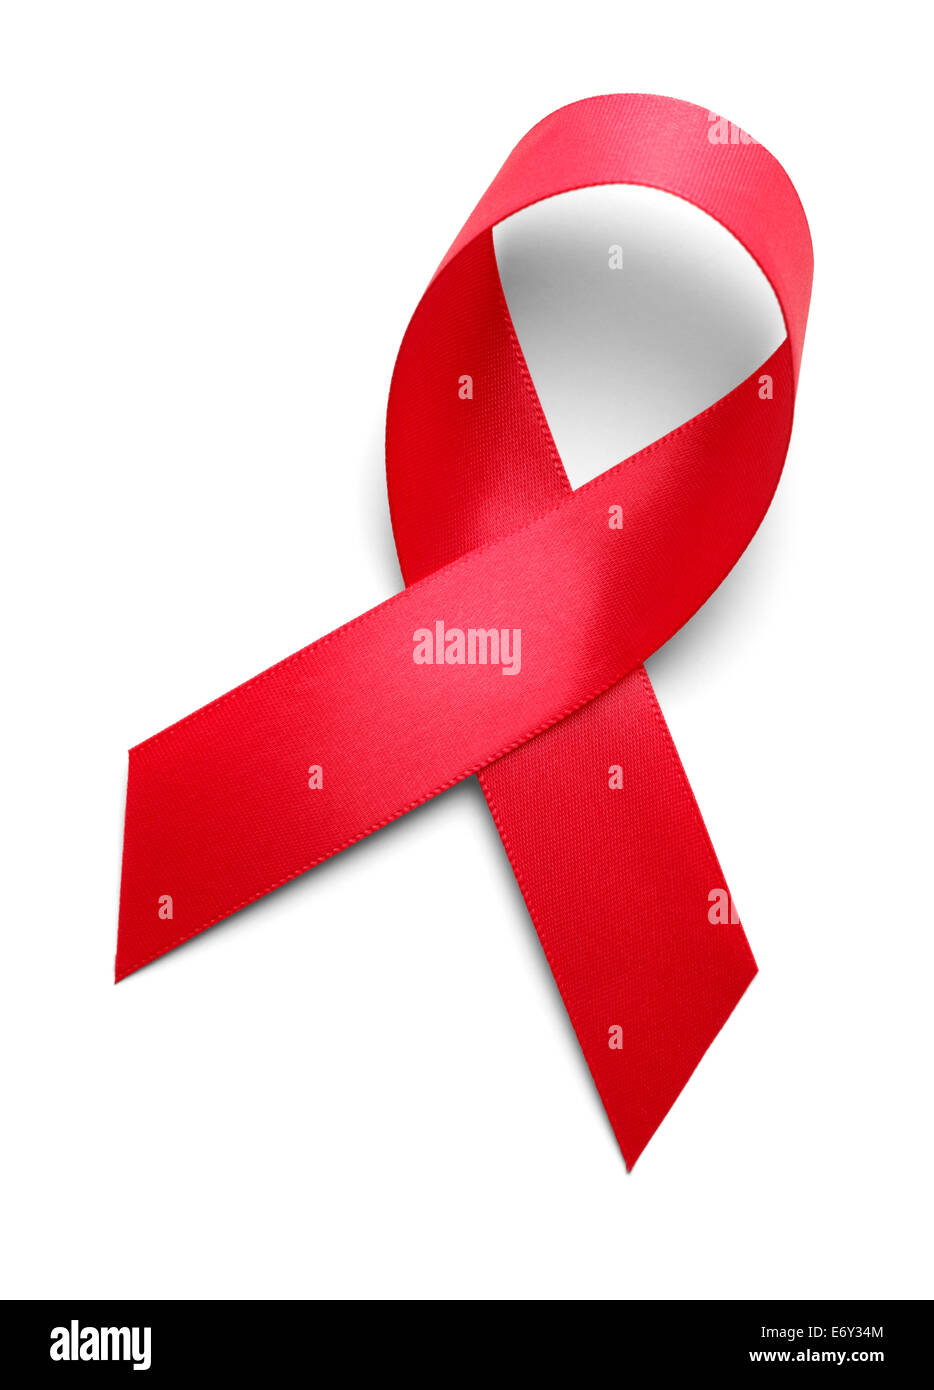 Red Ribbon Isolated on White Background. Stockfoto